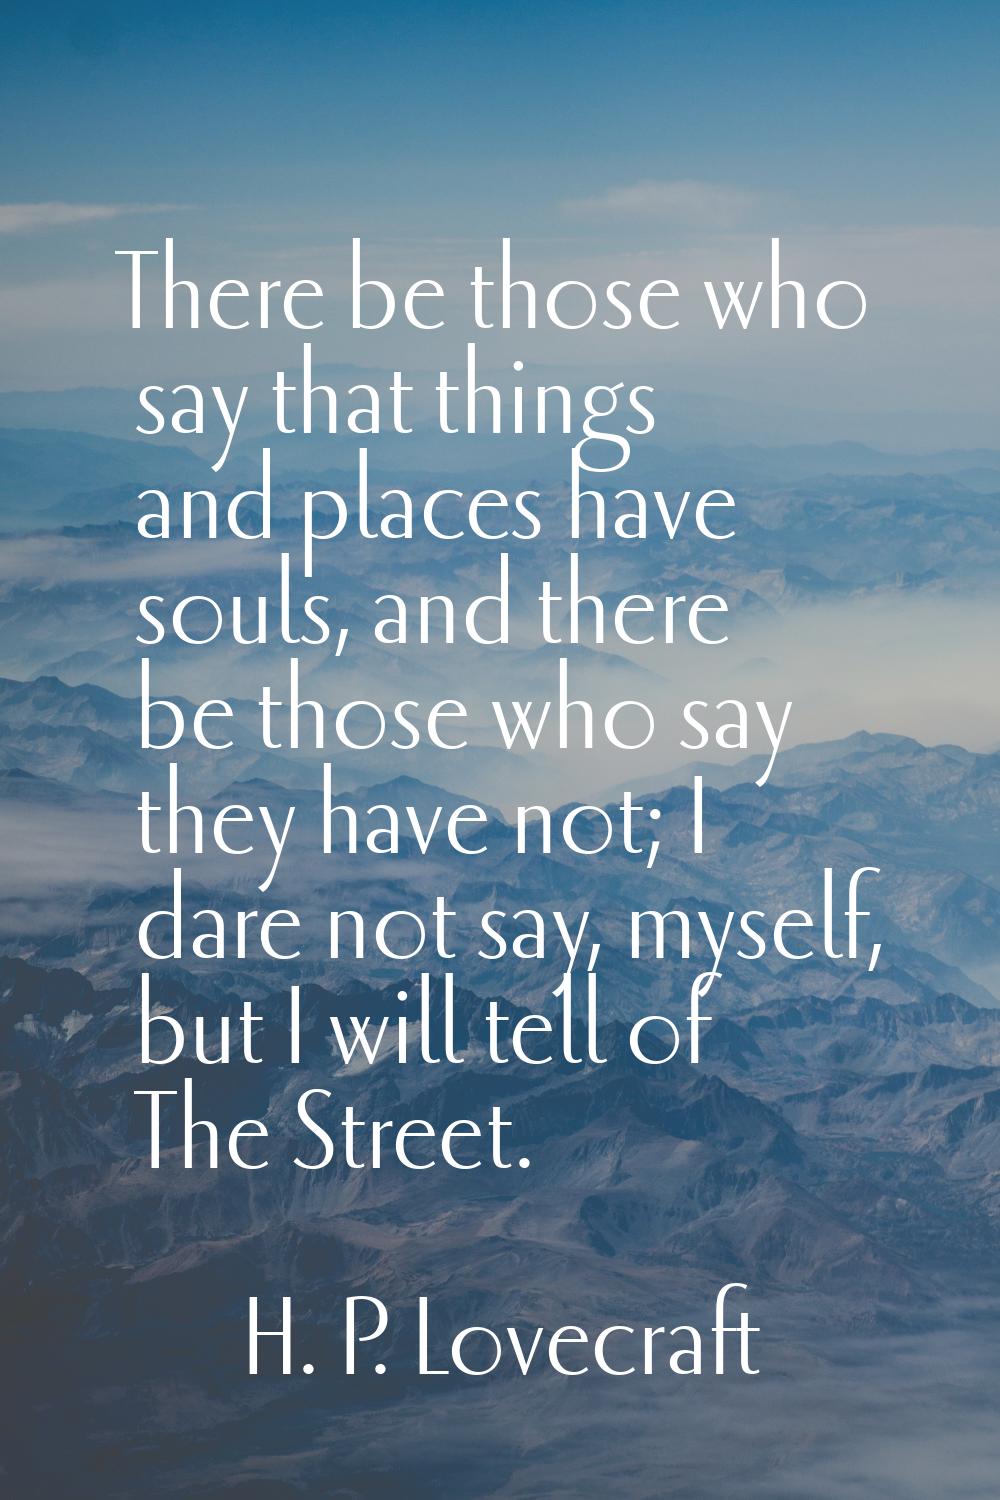 There be those who say that things and places have souls, and there be those who say they have not;